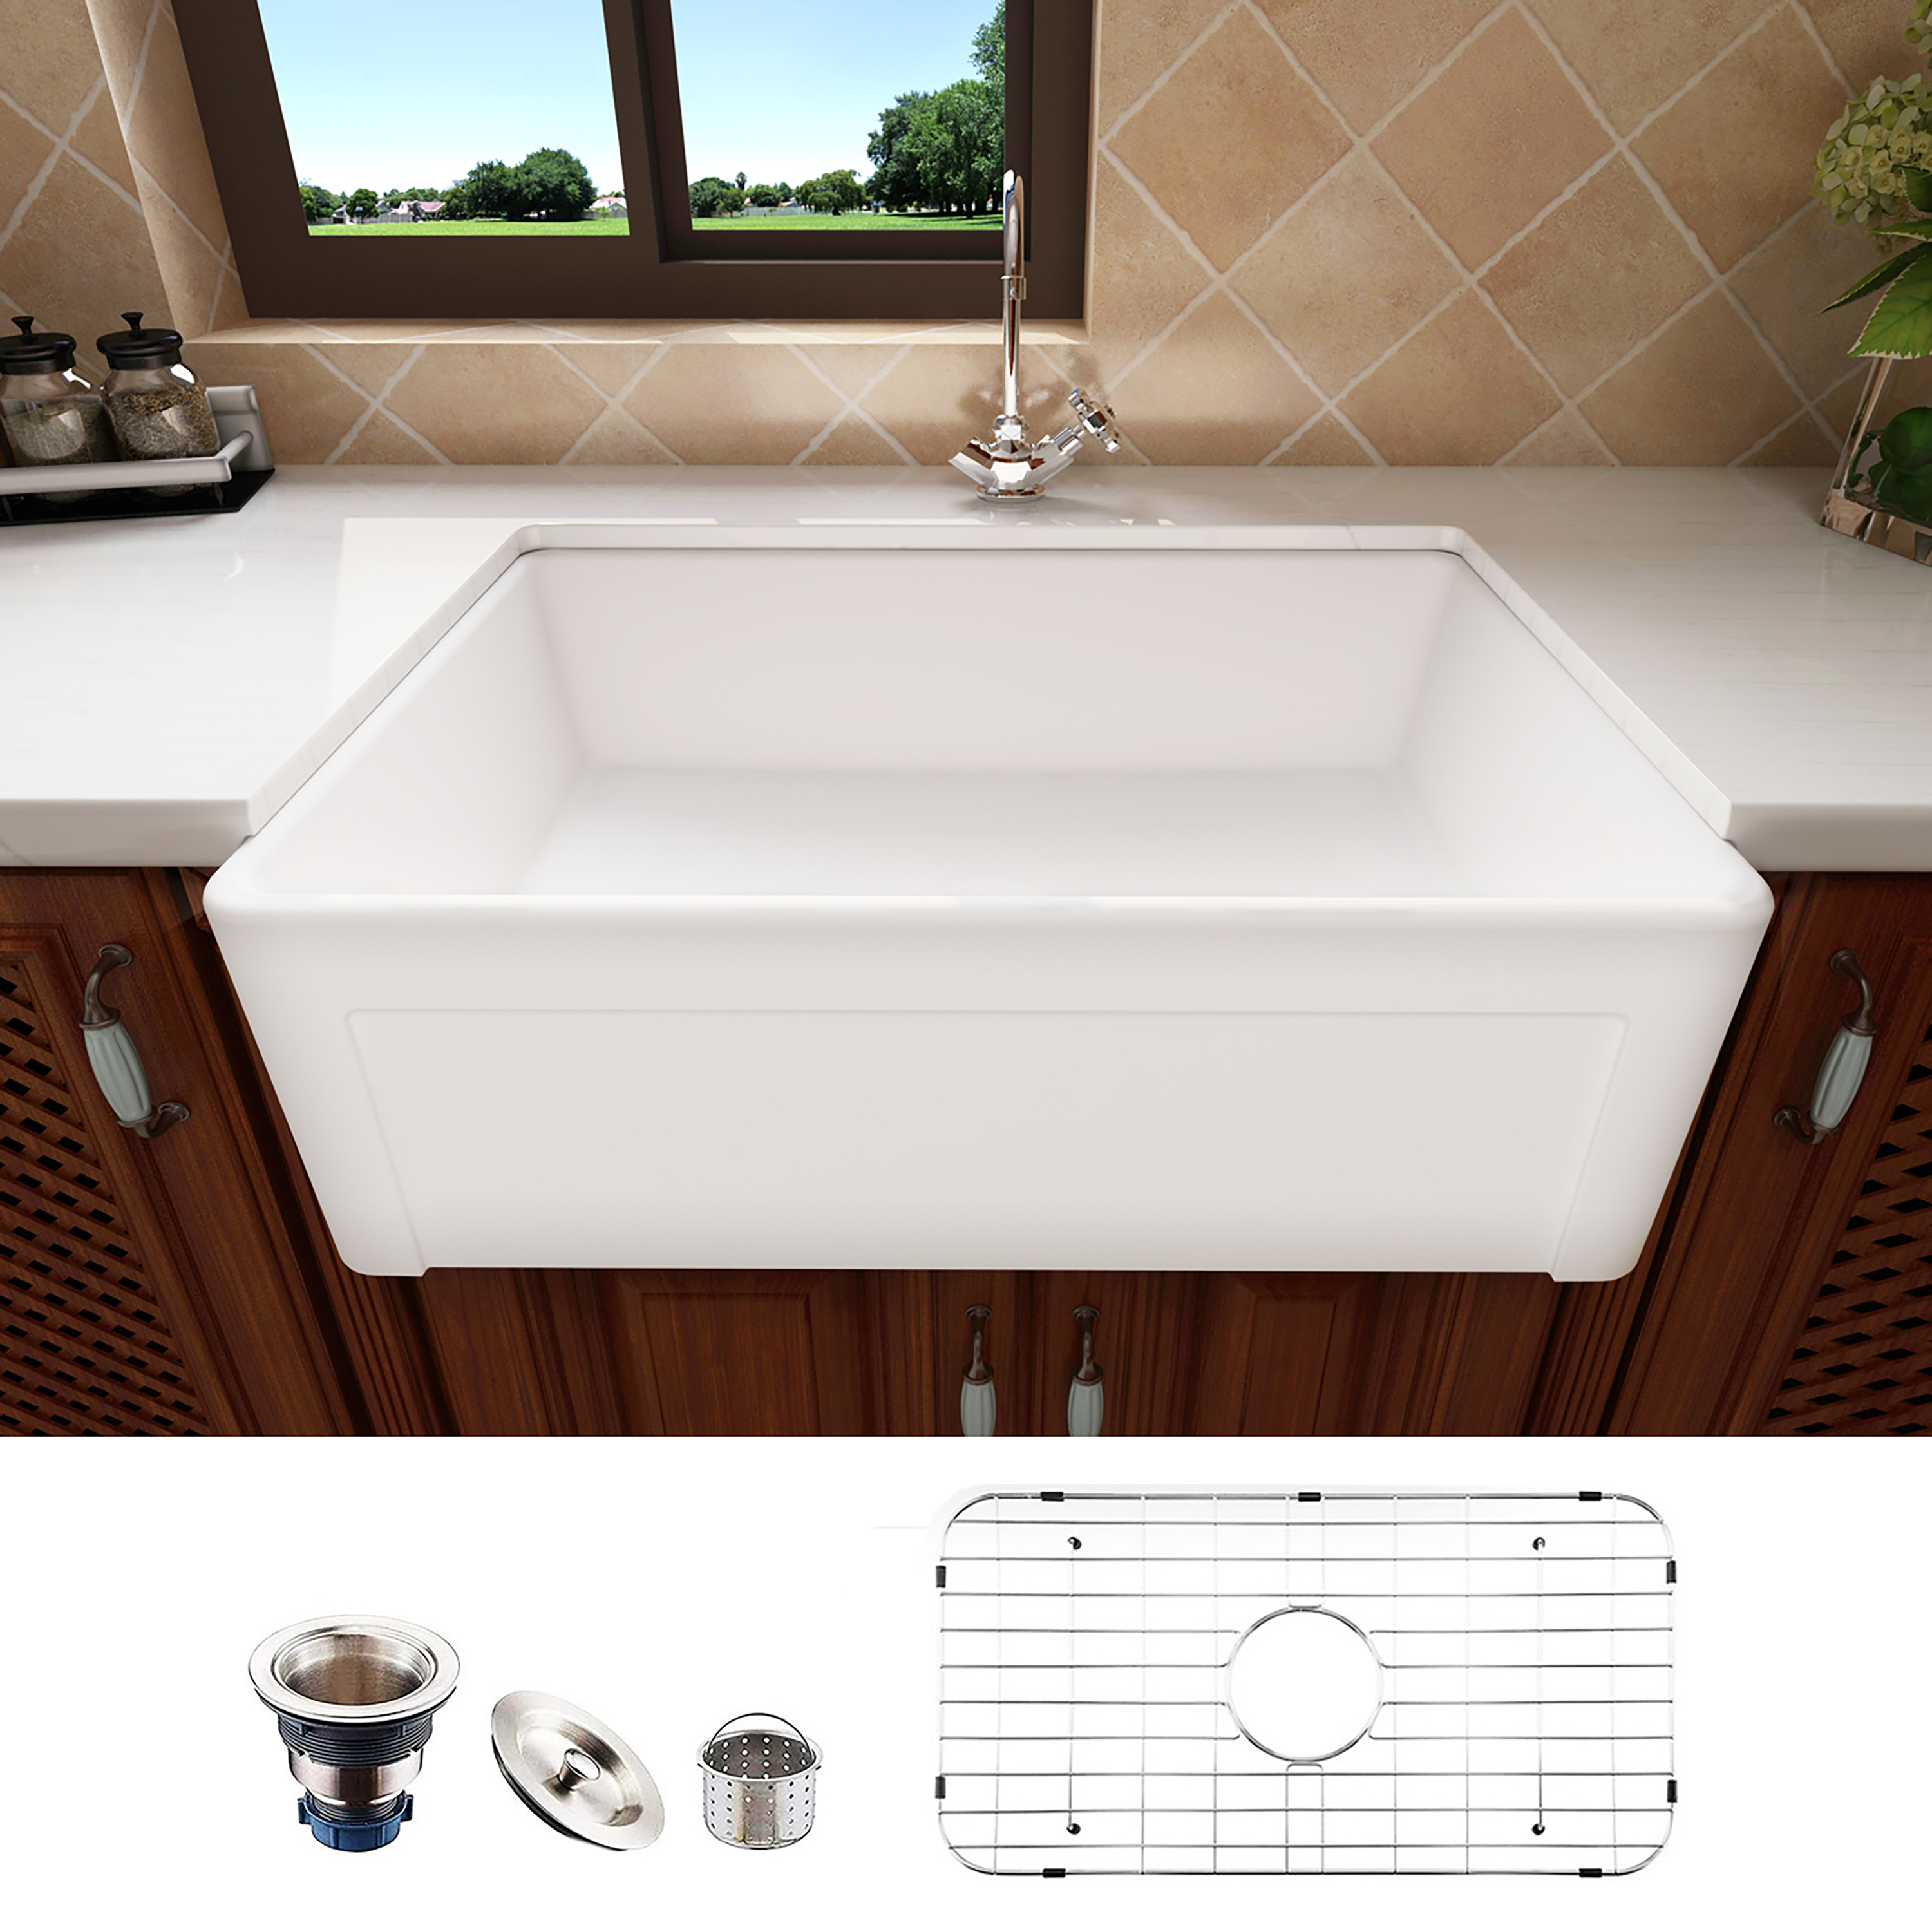 MEJE 30×20 inch Undermount Farmhouse Kitchen Sink,Reversible Utility Sink,Apron Front Sink,Single Bowl for kitchens – White Color